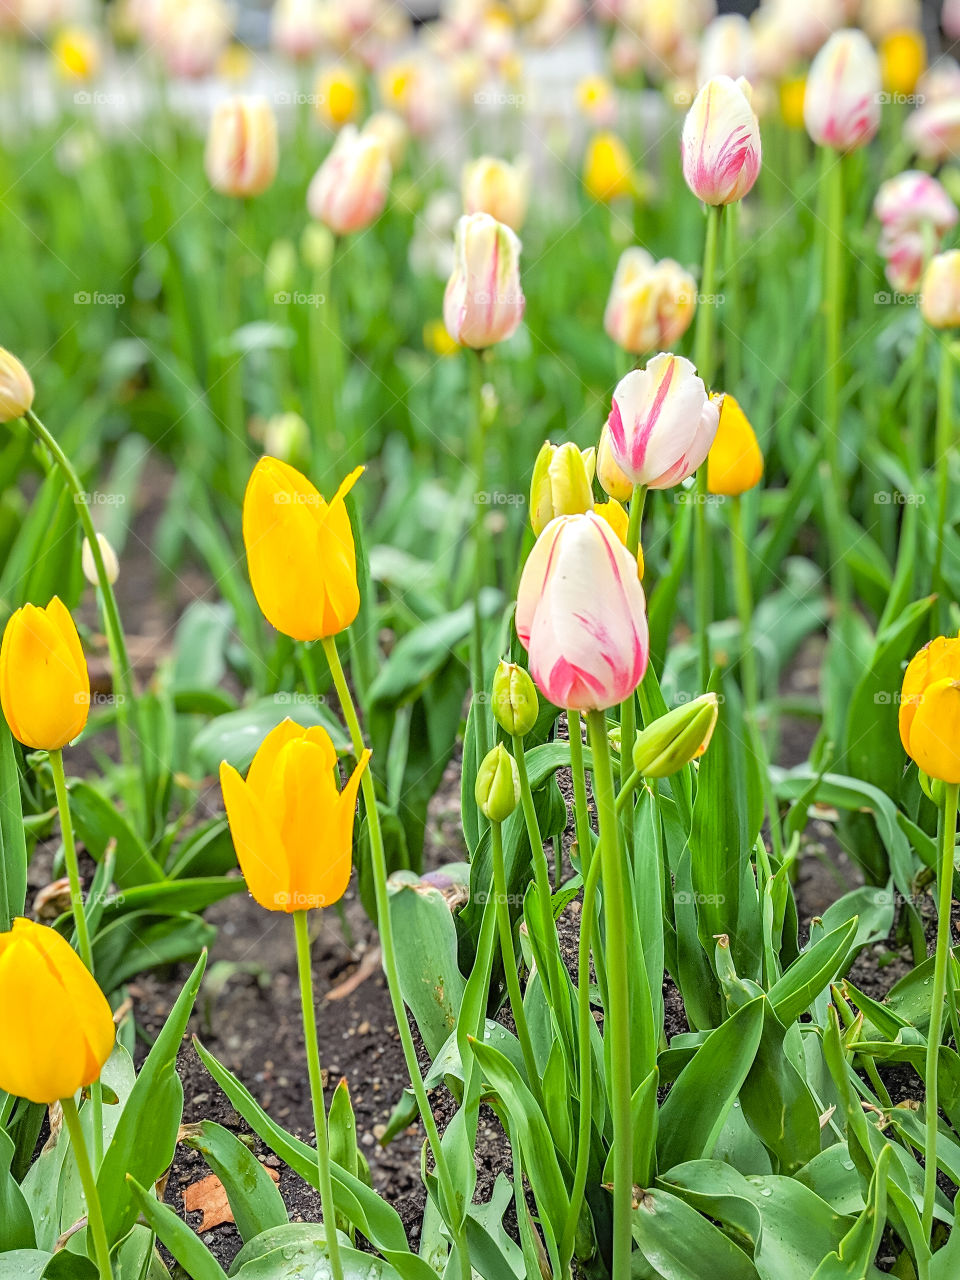 Vibrant, Bright, and Colorful Pink, White, and Yellow Tulips